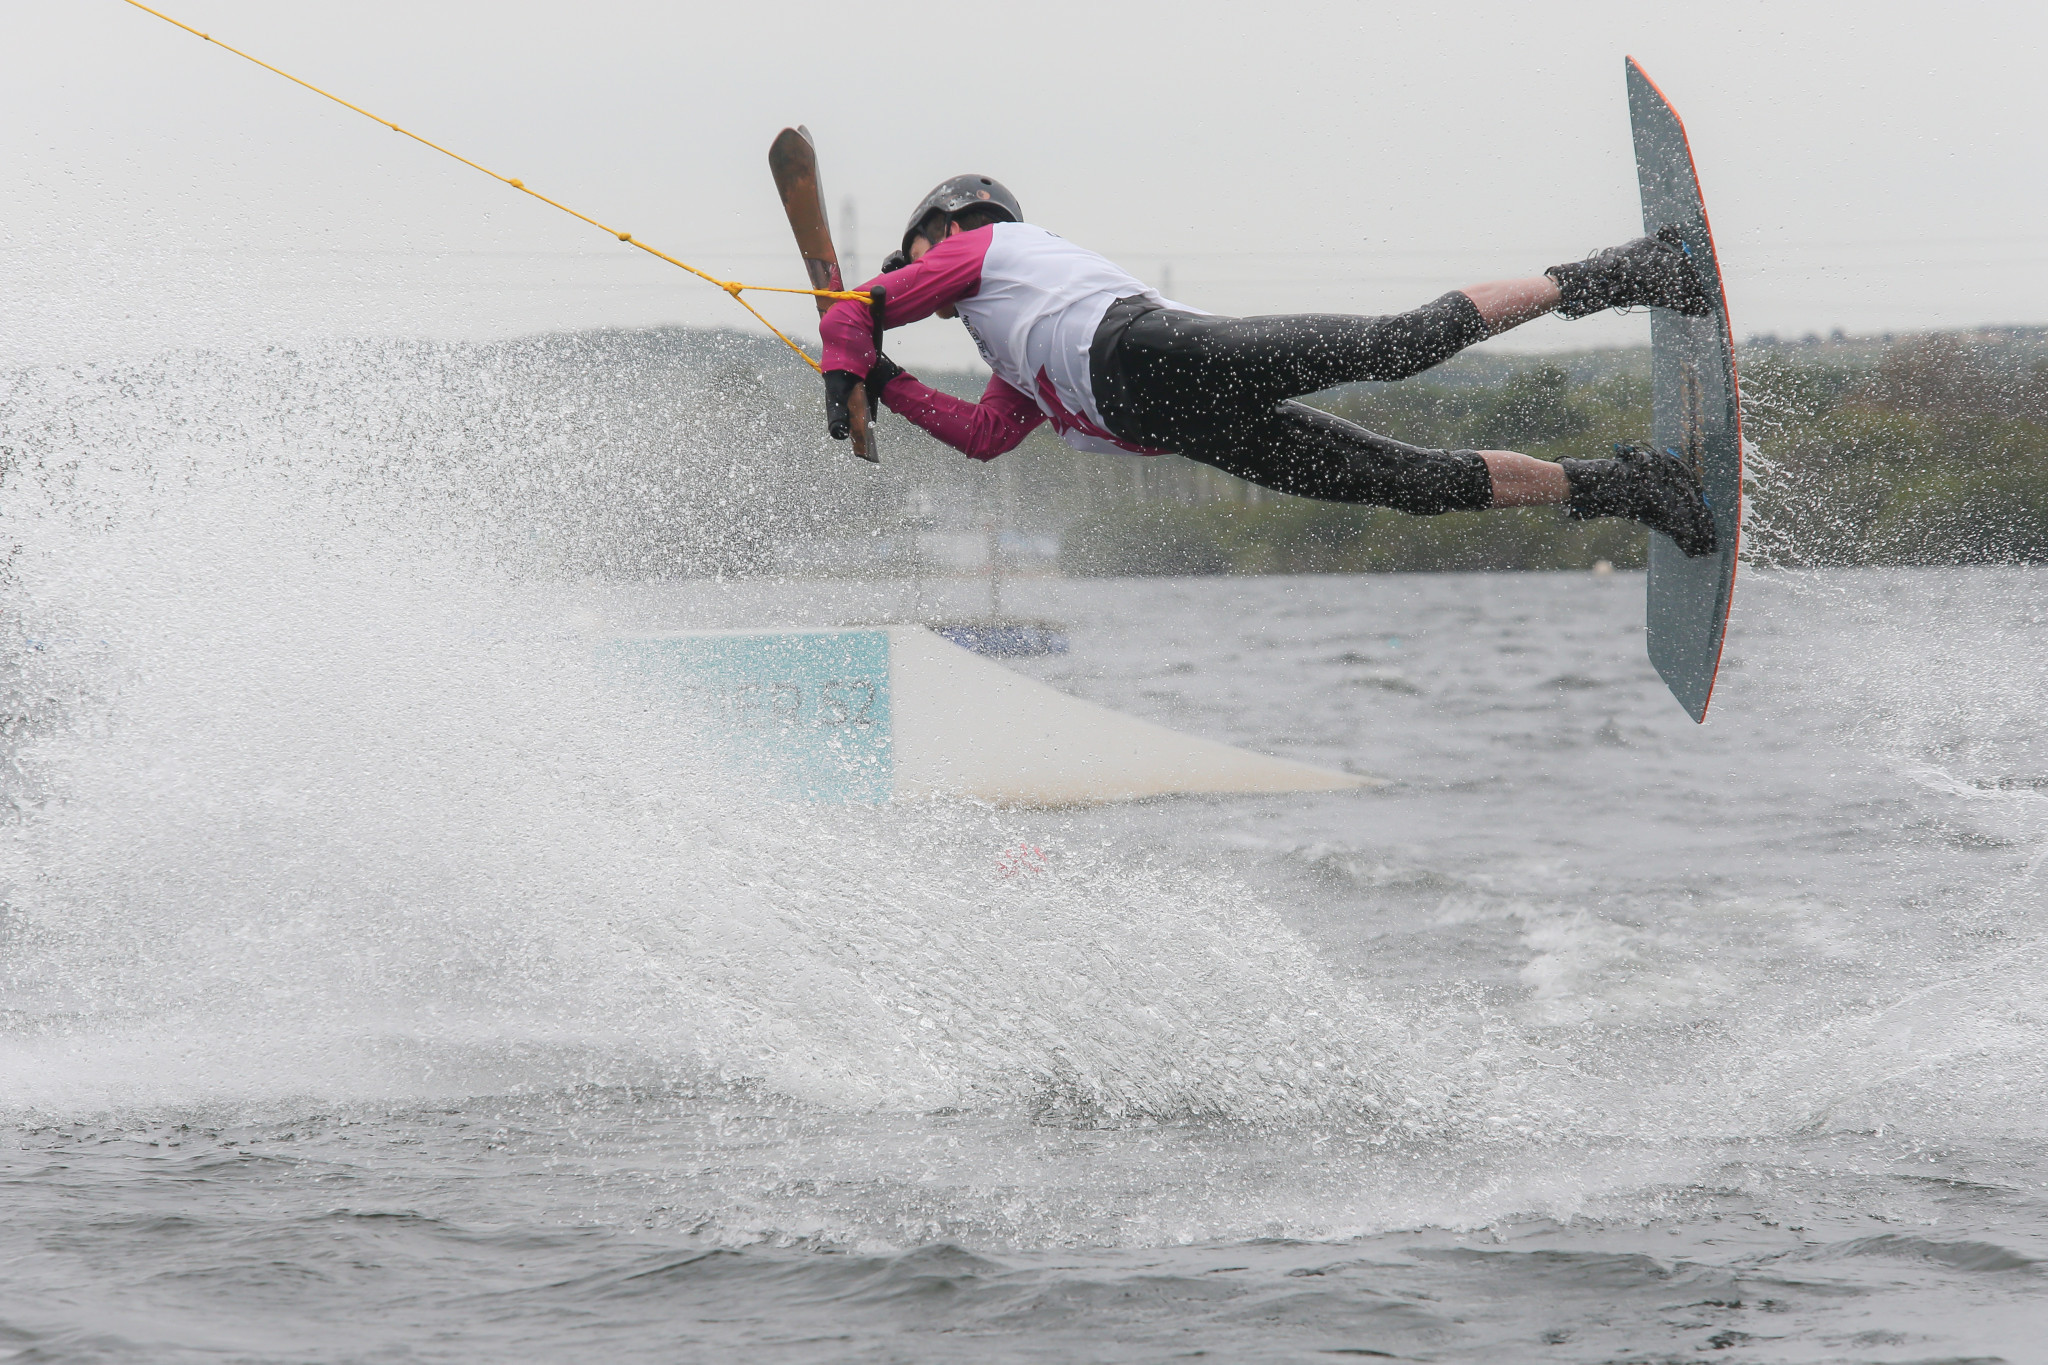 Wakeboarder Sebastian Kearns with the Baton at Chasewater country park  ©Getty Images